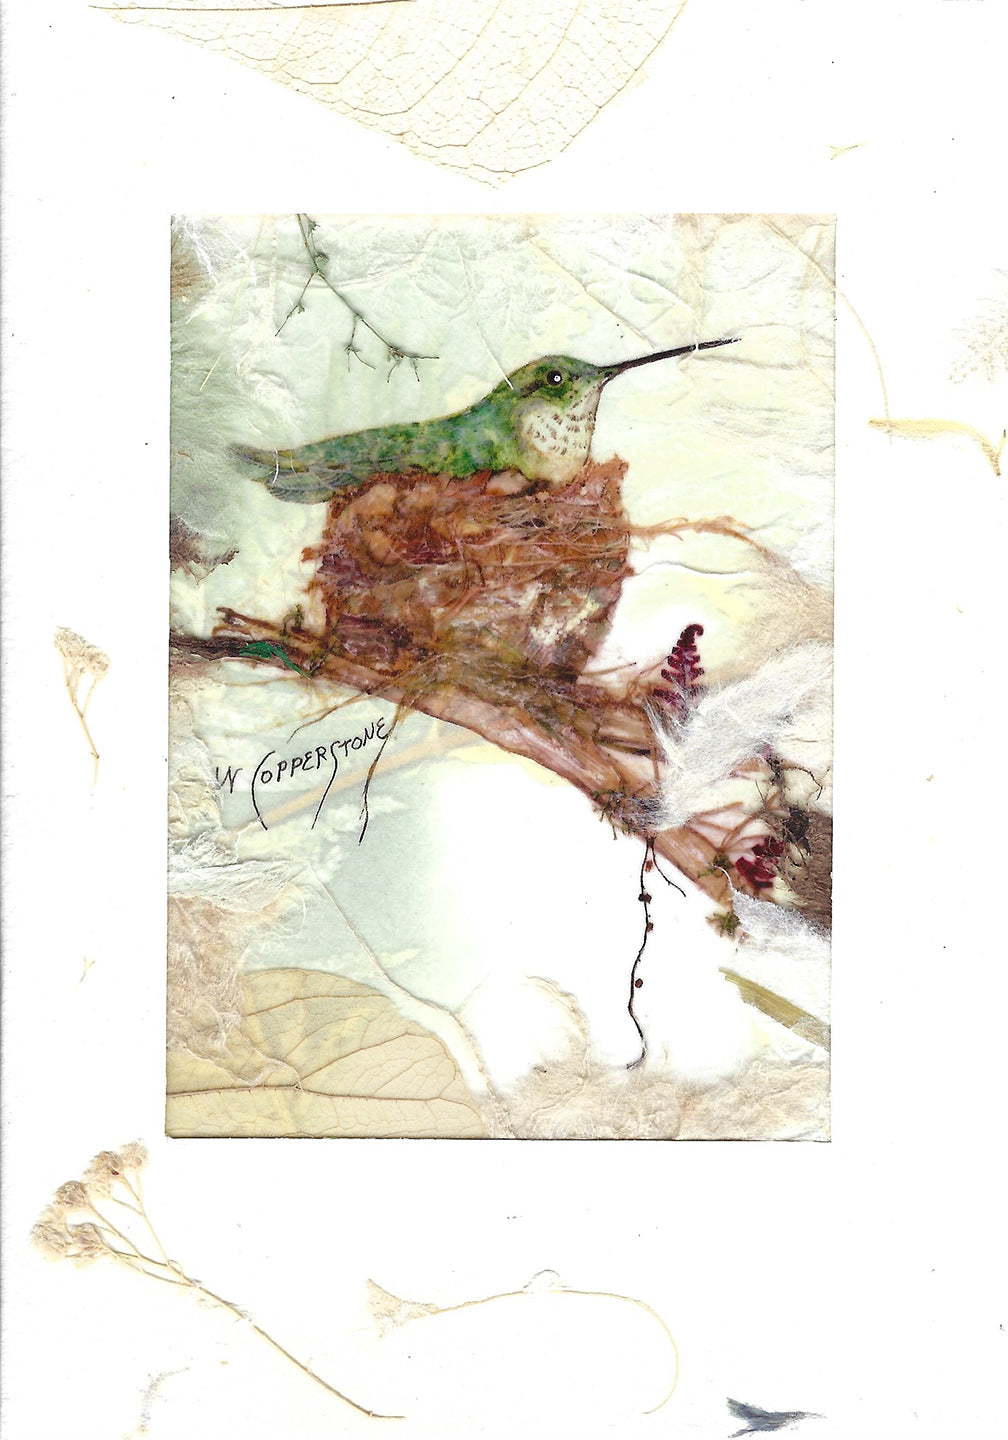 Hummingbird in Nest #3 by Janice Copperstone.